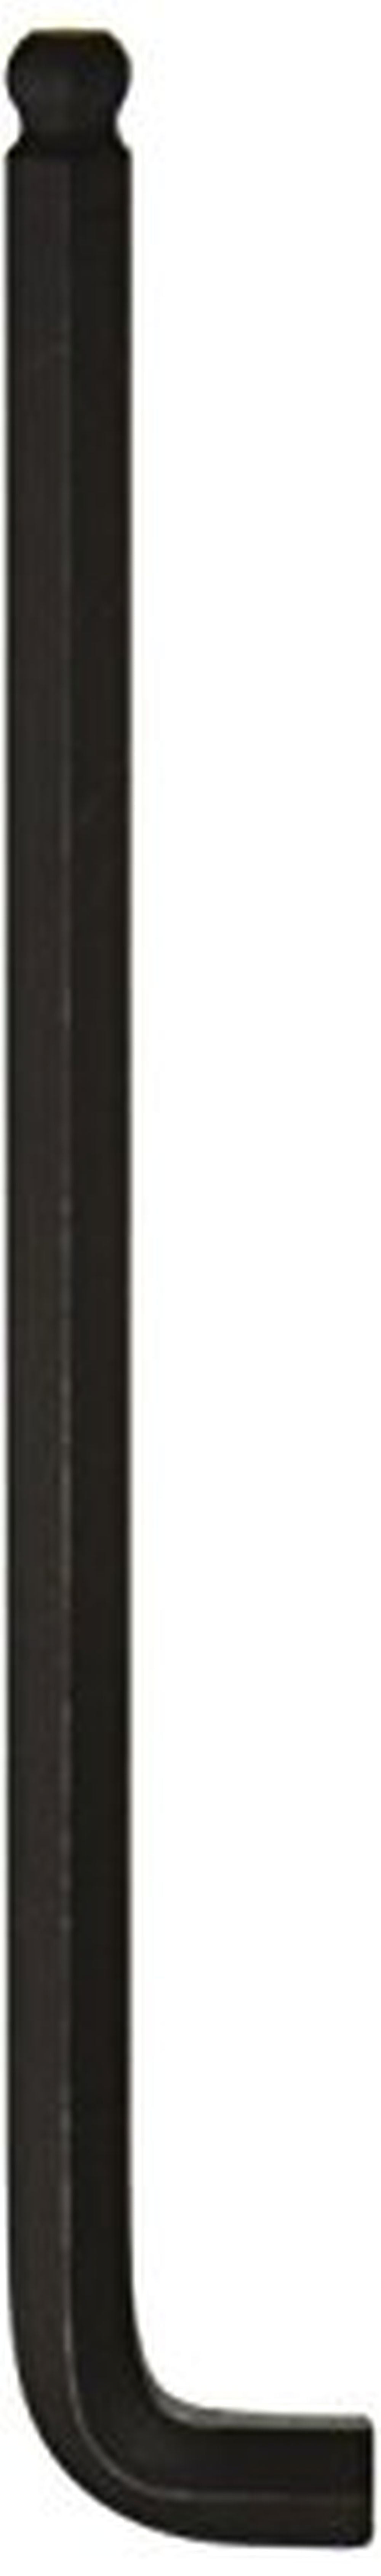 Bondhus 26713 5/16 Stubby Ball End Tip Hex Key L-Wrench with BriteGuard Finish Pack of 25 5.4 5.4 